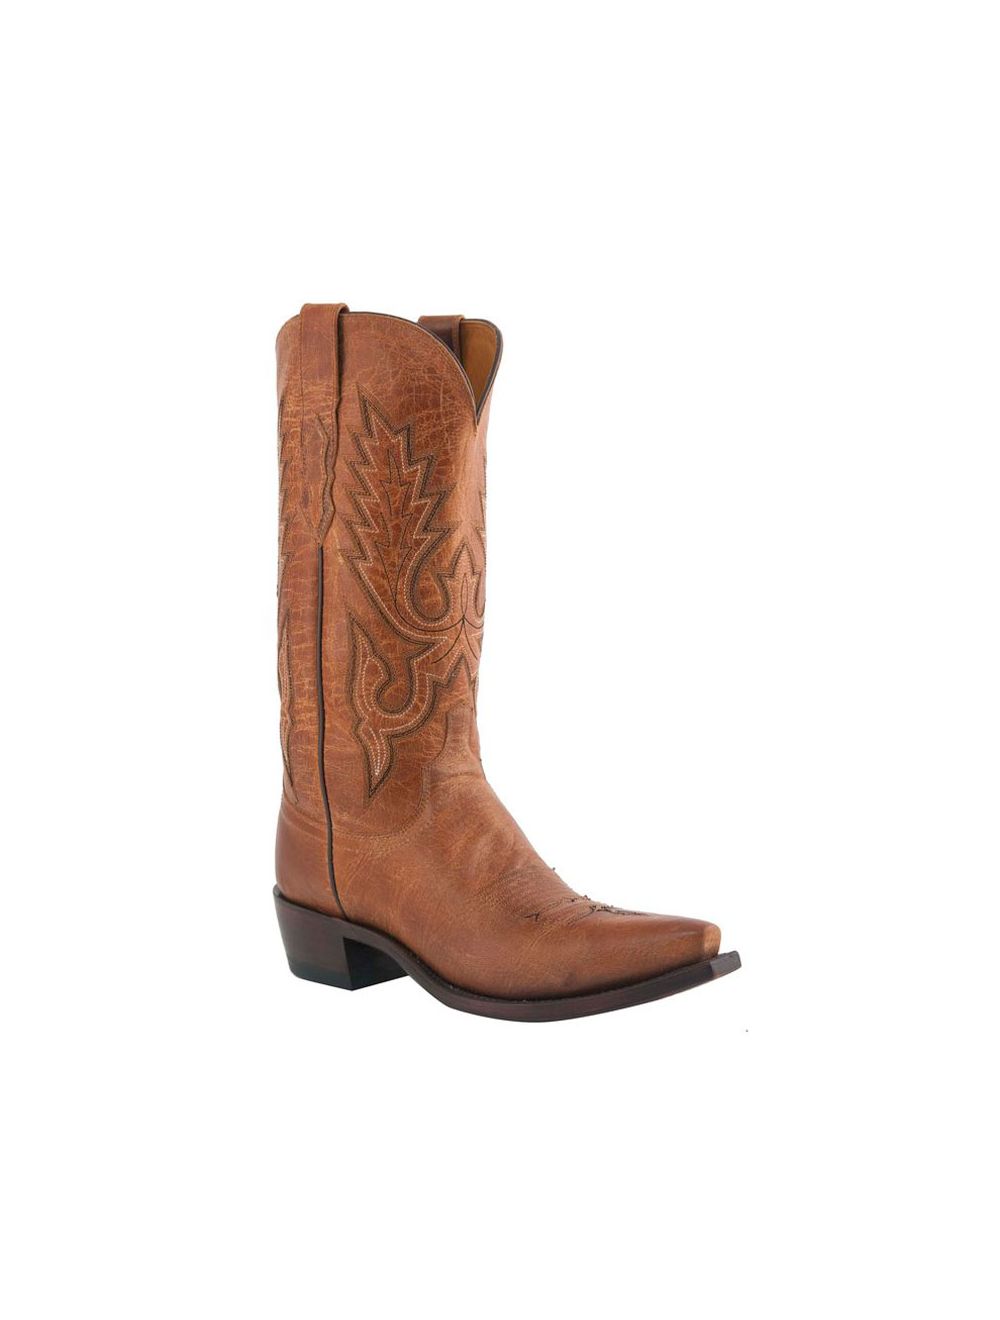 Lucchese M1008 Men's Tan Mad Dog Goat Snip Toe Western Boots